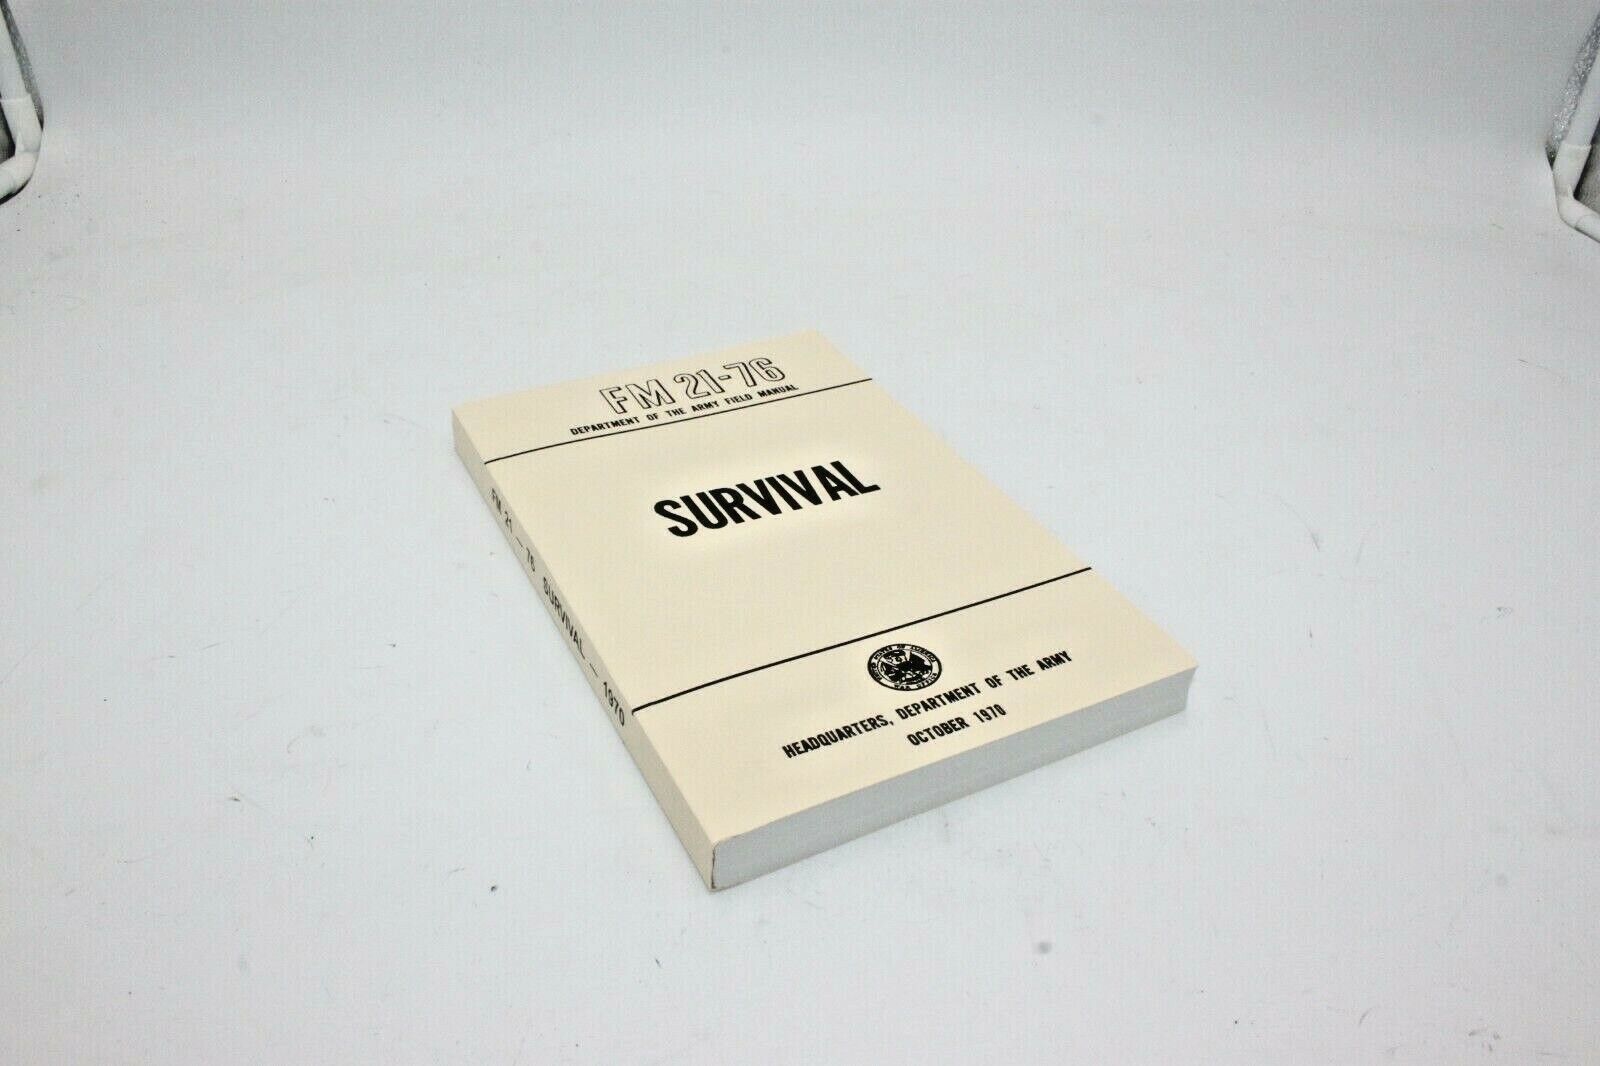 NEW - US Army SURVIVAL Book Tactical Survival Prepping Manual FM 21-76 SHTF